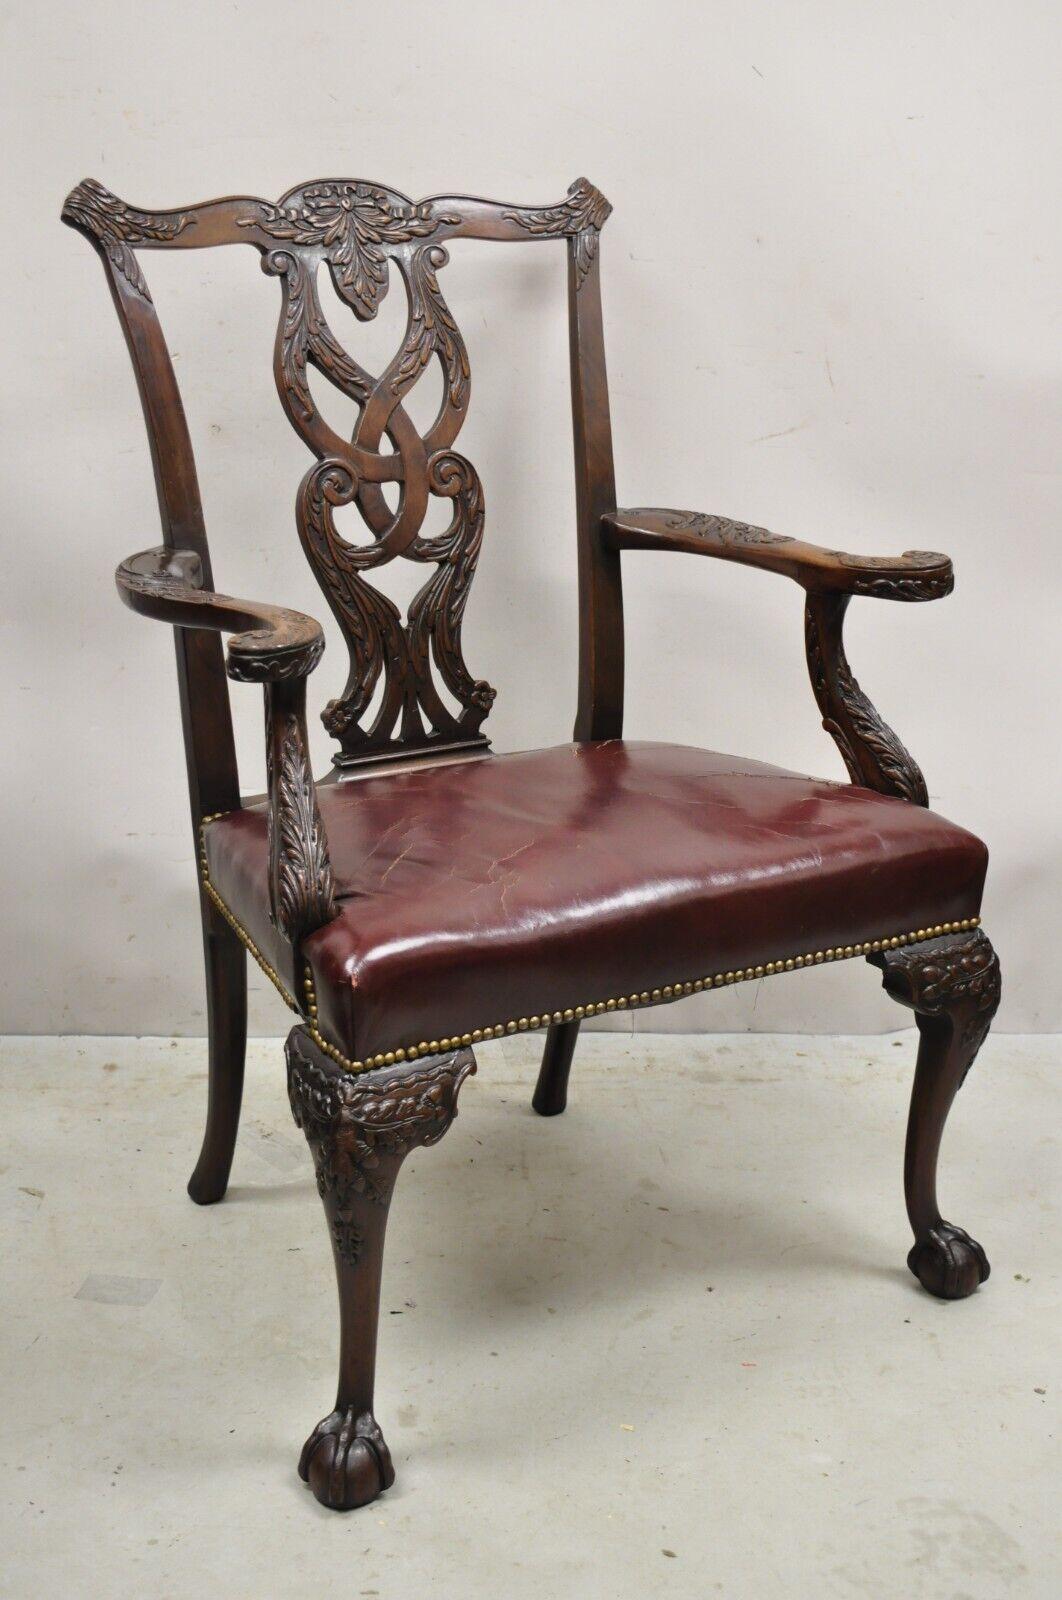 Antique Carved Mahogany Chippendale Style Ball and Claw Leather Arm Chair. Item features a solid mahogany wood frame, nicely carved details, burgundy leather seat, great style and form. Circa Early 1900s. Measurements: 39.5